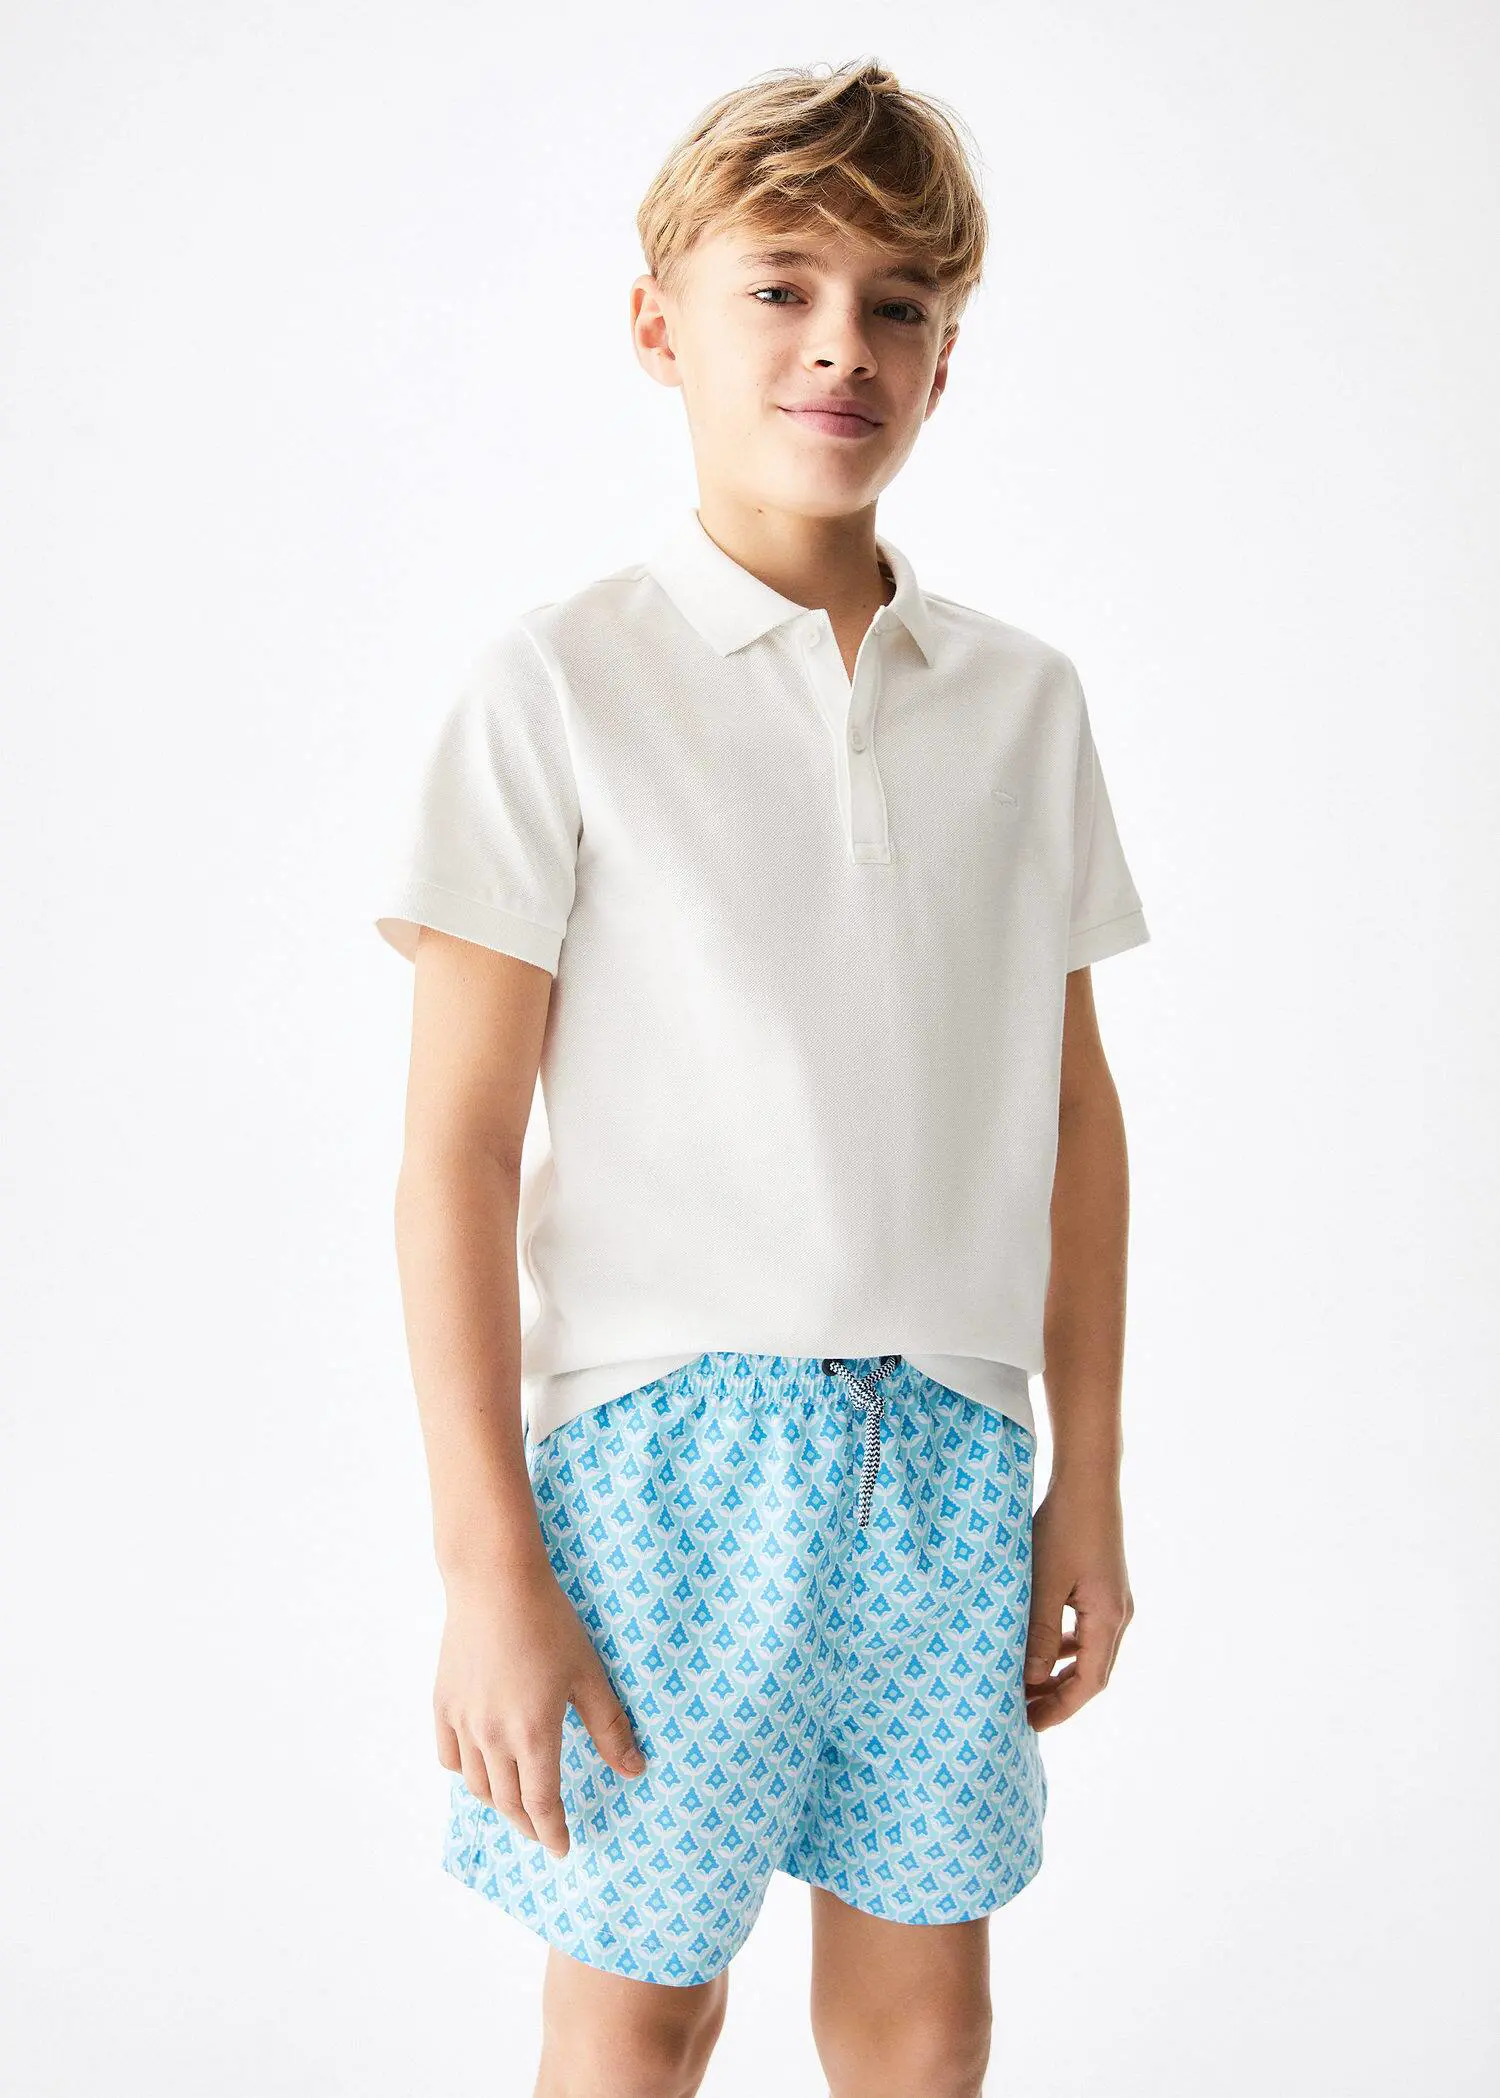 Mango KIDS/ Printed swimsuit. a young man wearing a white shirt and blue shorts. 